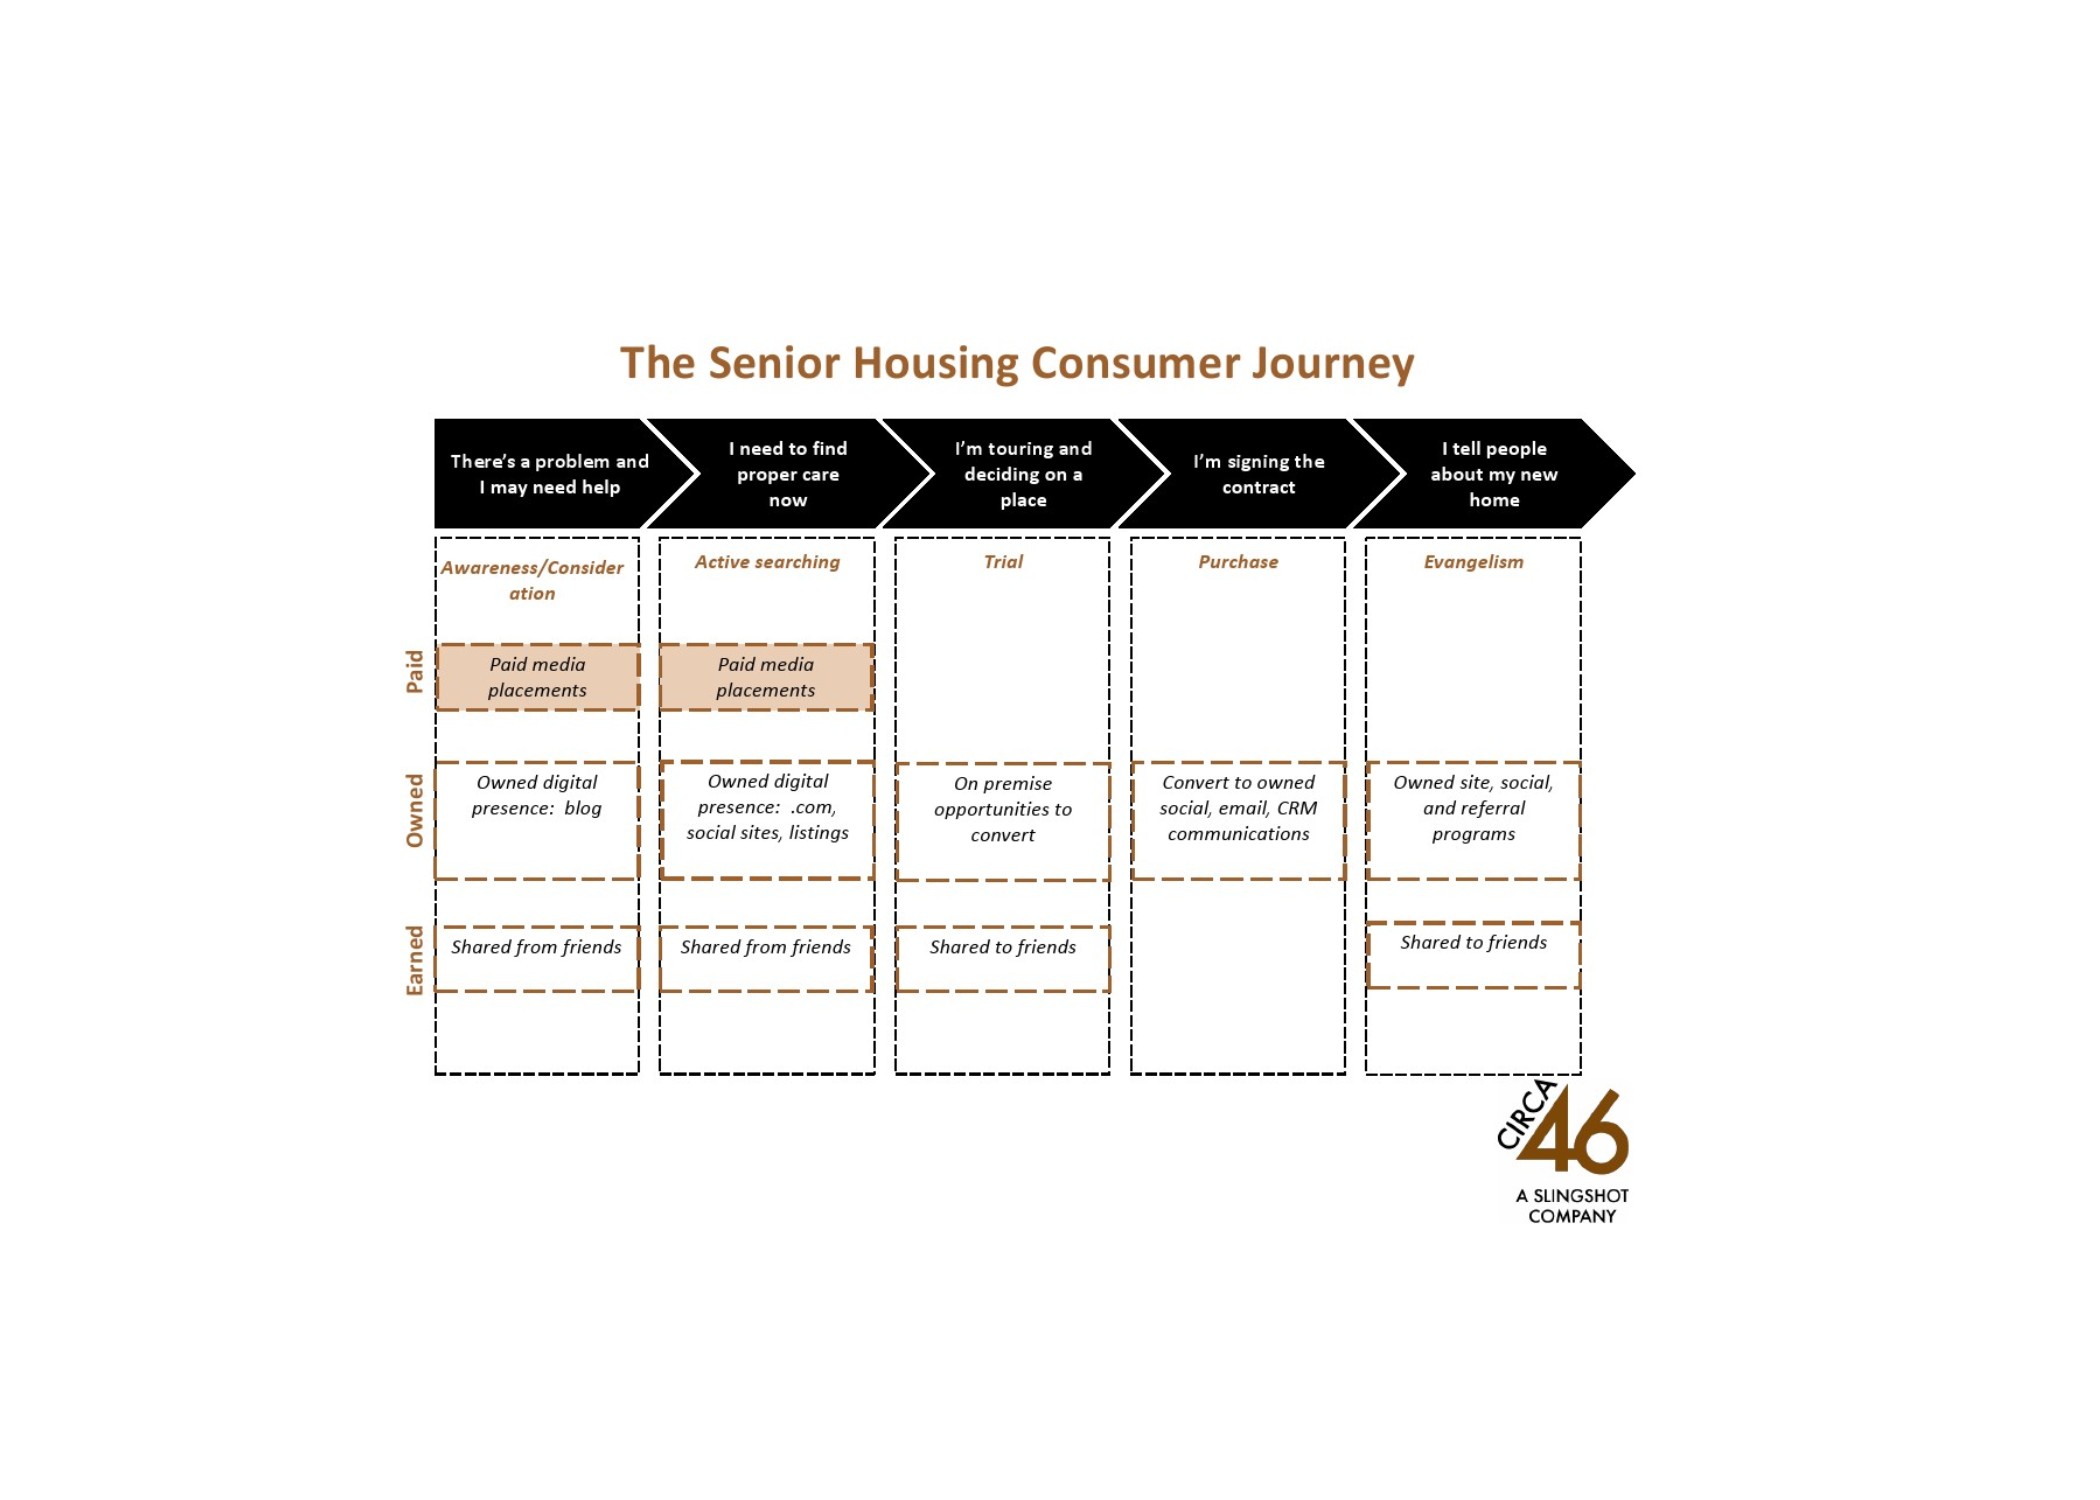 The Consumer Journey:  How Your Next Resident Gets To Your Assisted Living Community